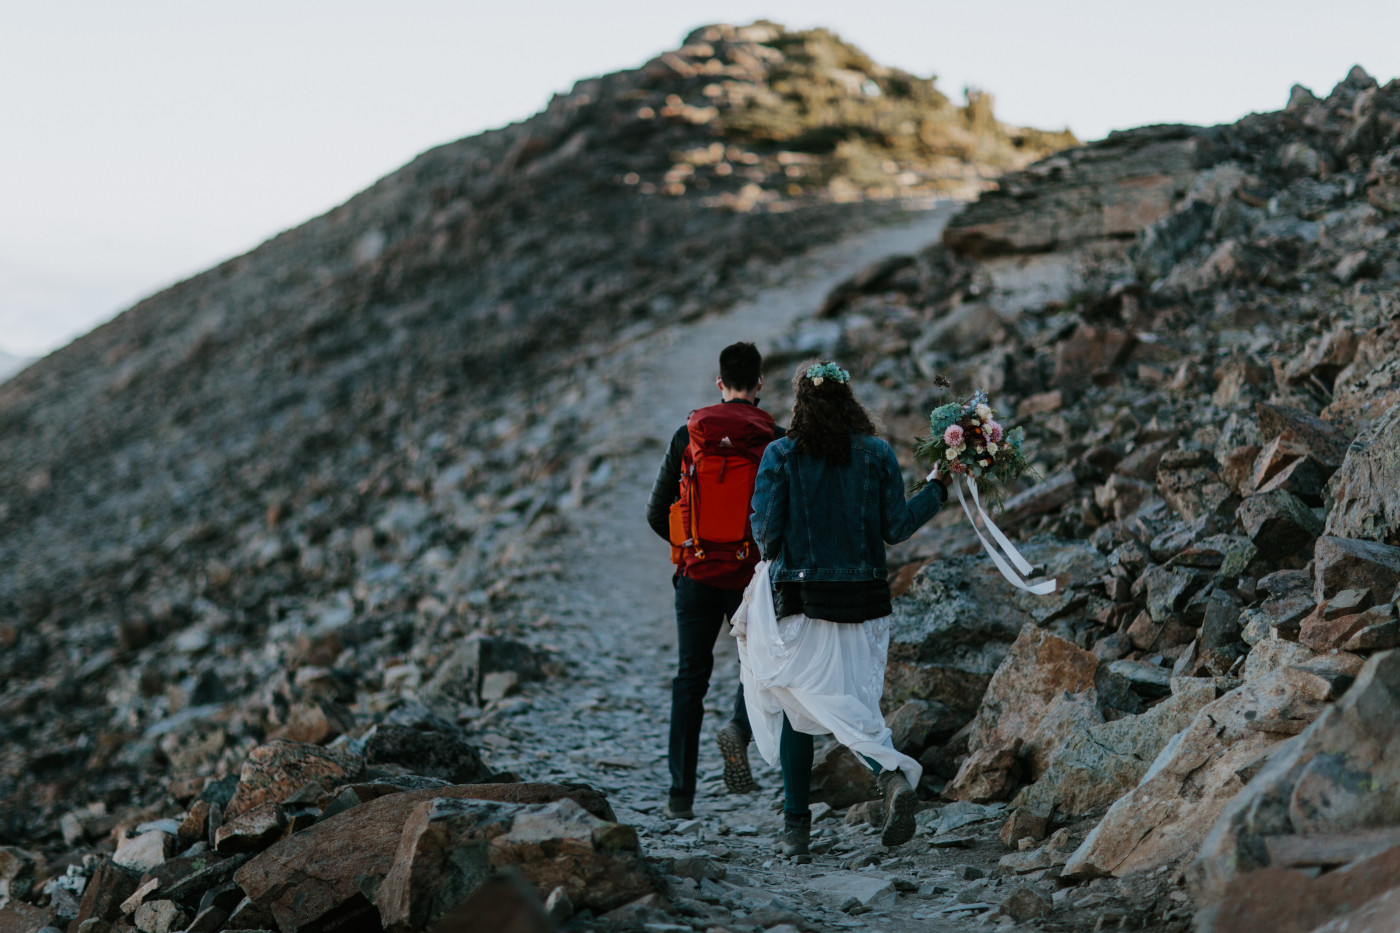 Chad and Tasha hiking to the lookout. Elopement photography at Mount Rainier by Sienna Plus Josh.